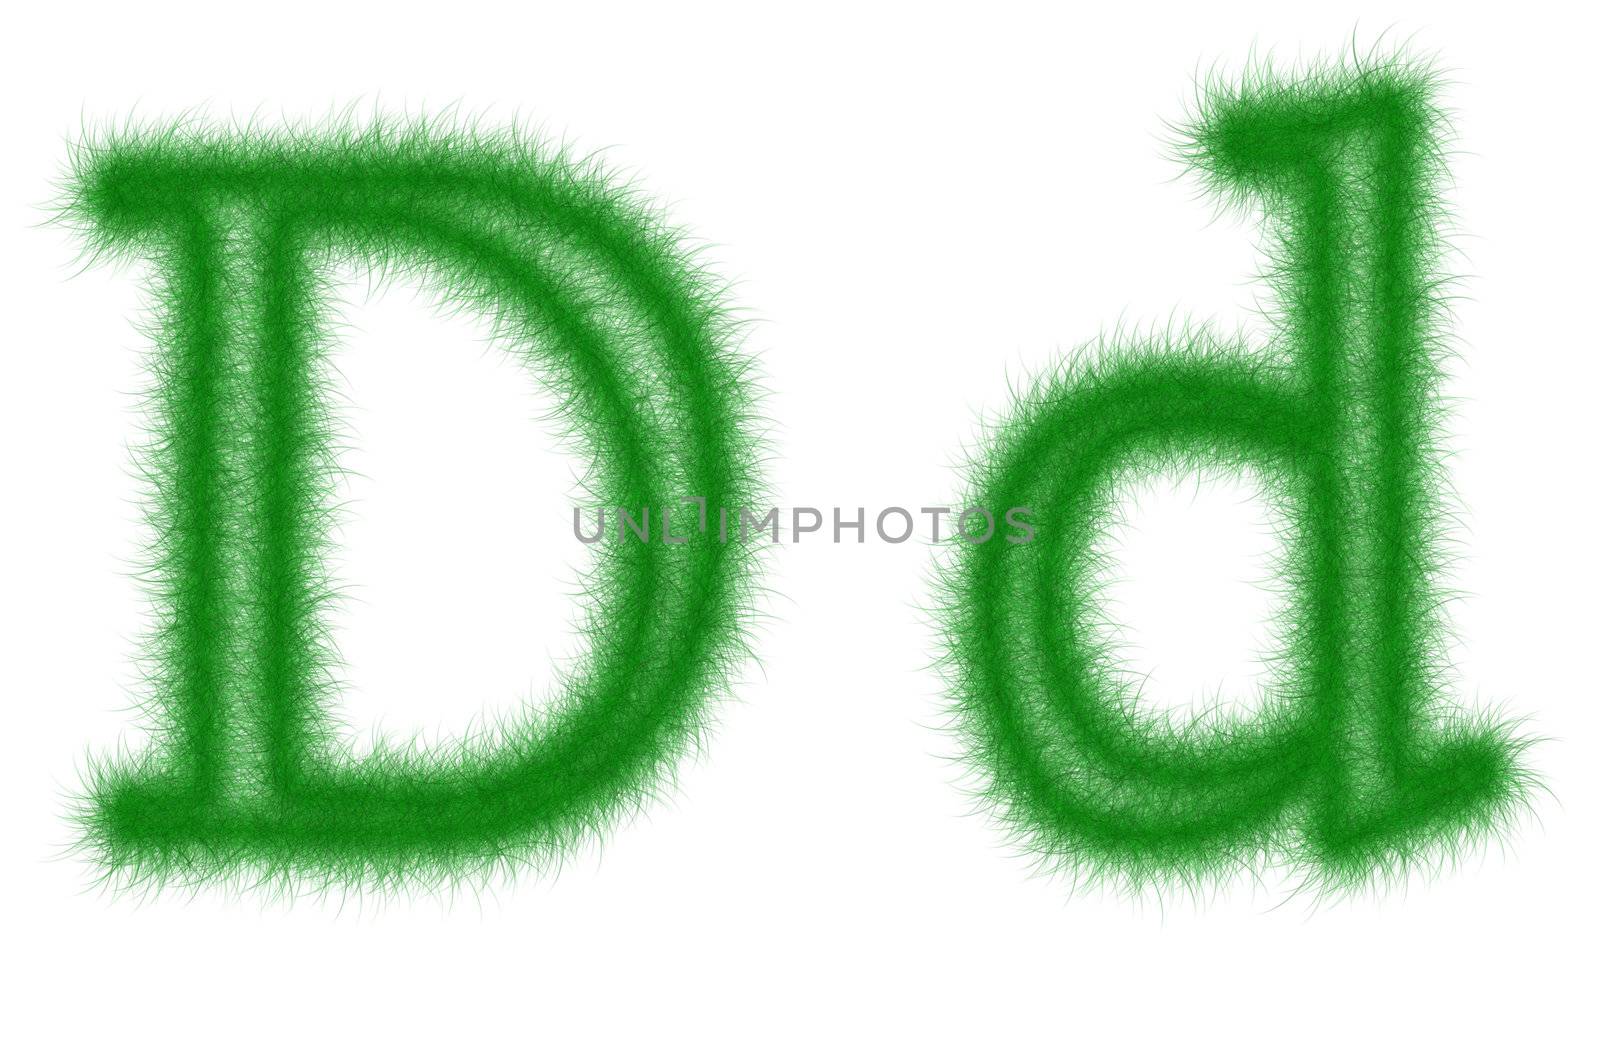 Green grass font isolated on white background